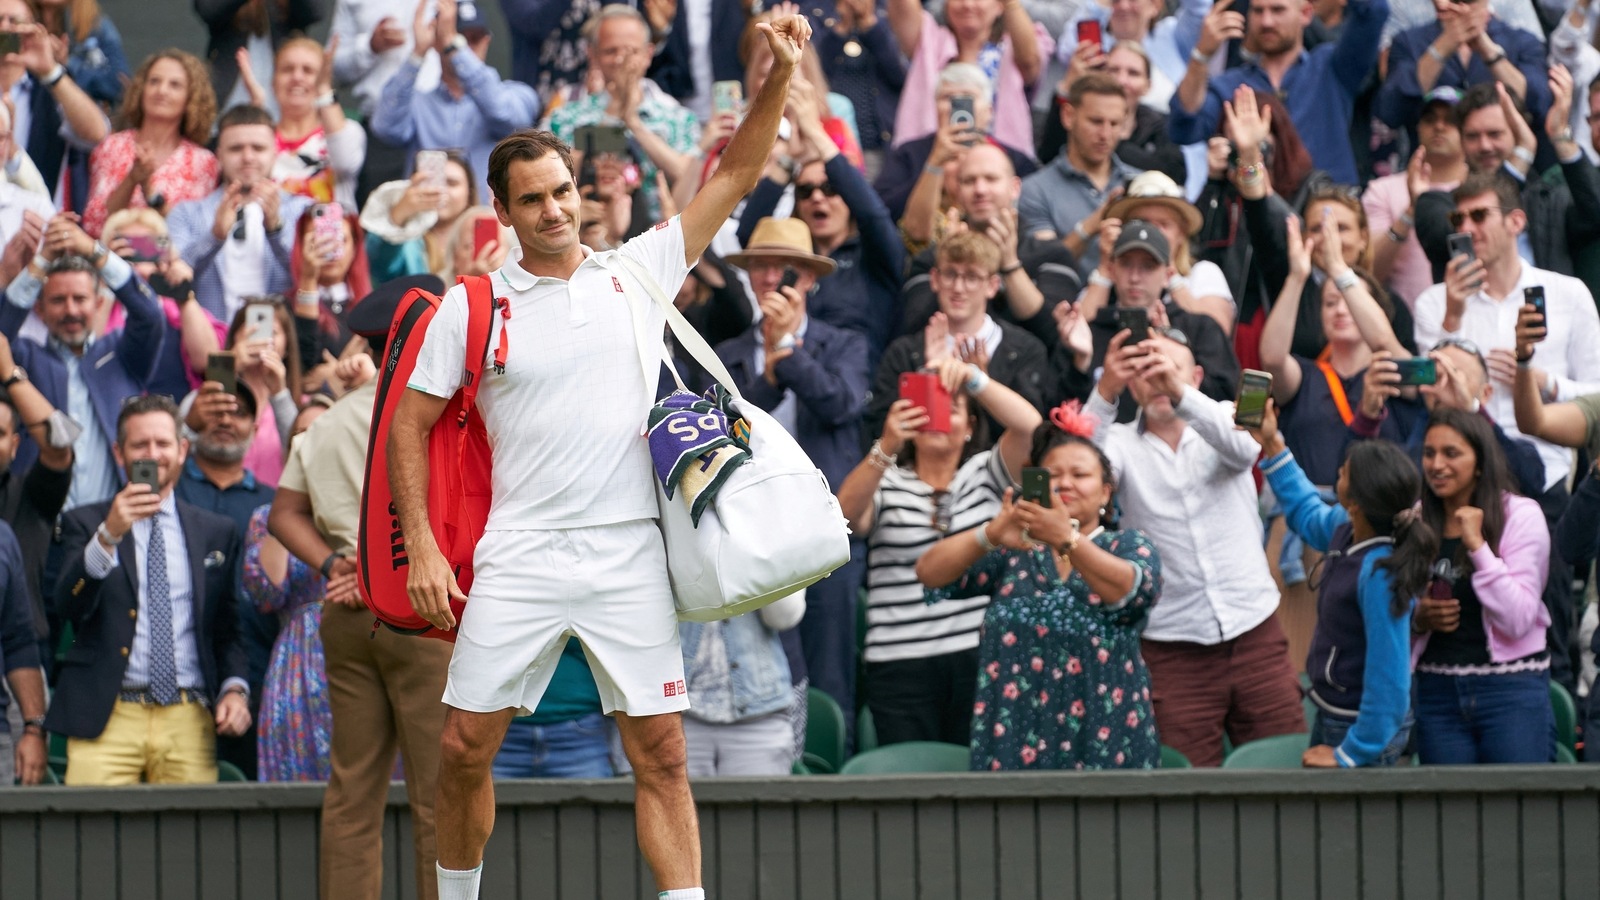 never-thought-i-would-say-this-but-six-months-ago-roger-federer-reveals-future-plans-after-retirement-announcement